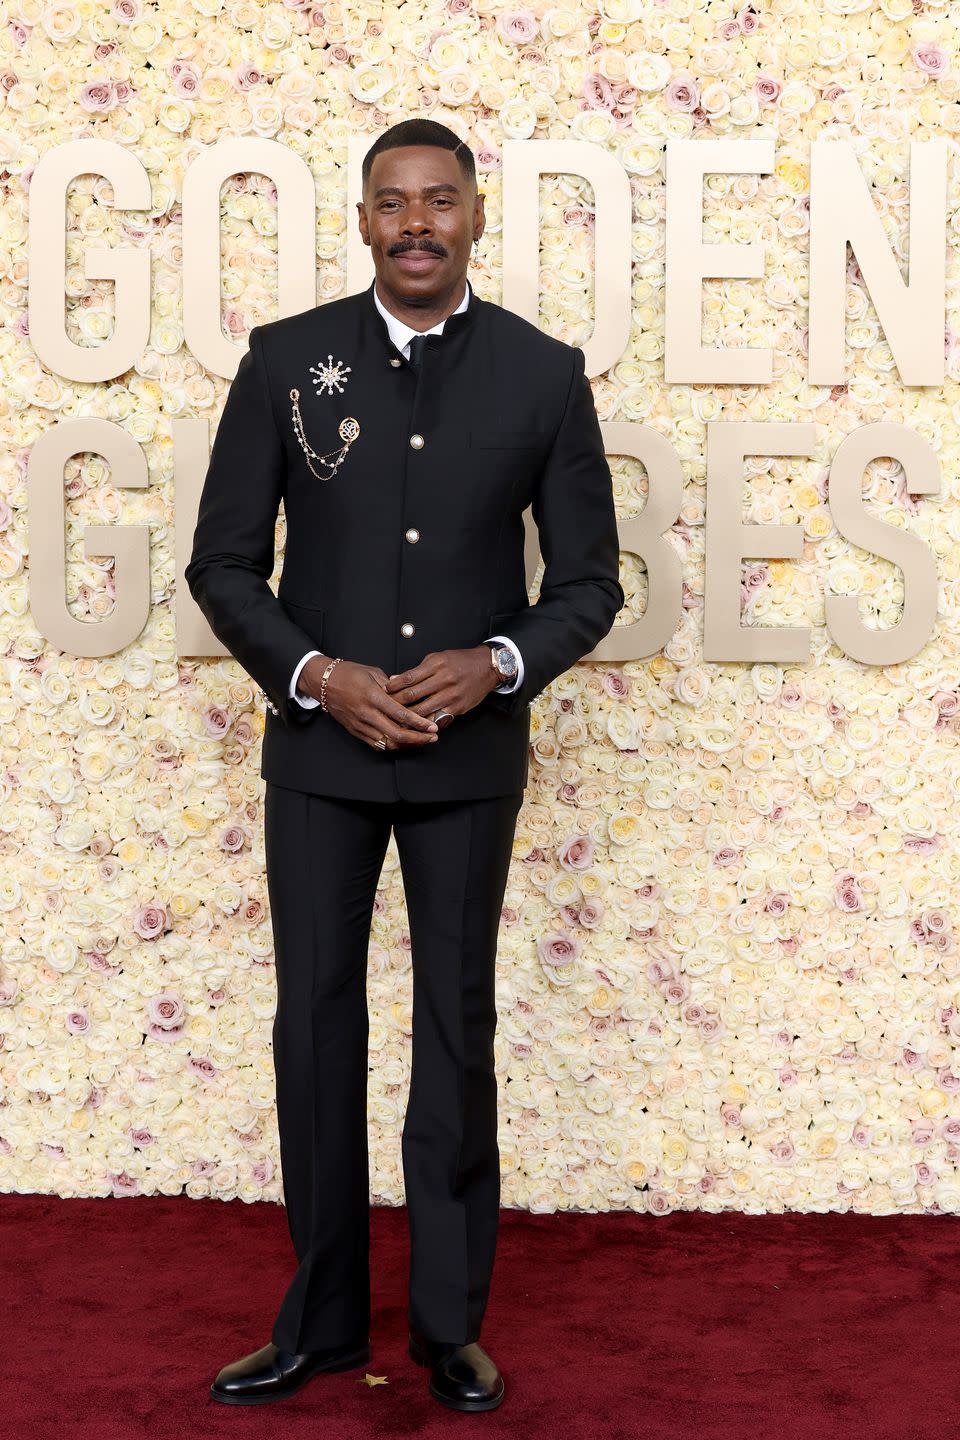 beverly hills, california january 07 colman domingo attends the 81st annual golden globe awards at the beverly hilton on january 07, 2024 in beverly hills, california photo by monica schippergathe hollywood reporter via getty images